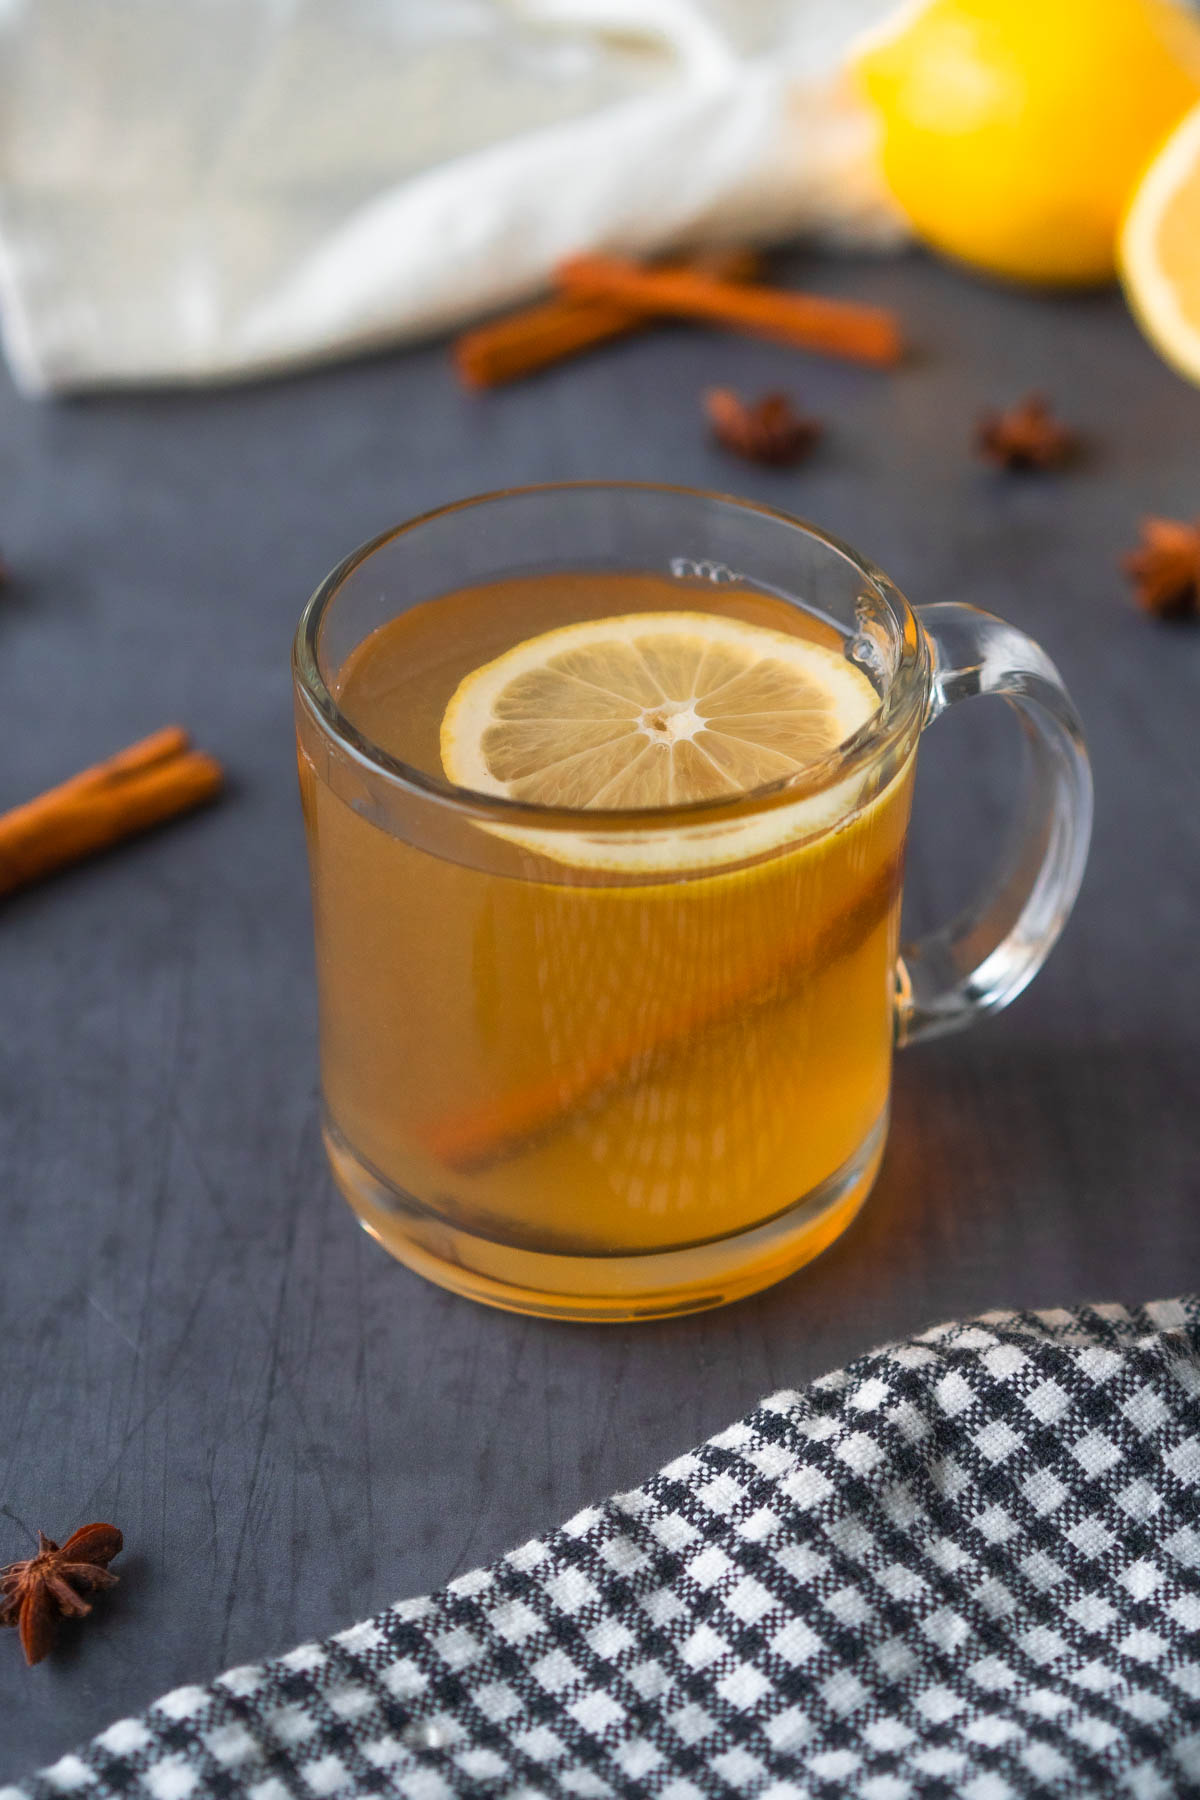 clear mug filled with an amber liquid and topped with a lemon slice and cinnamon stick